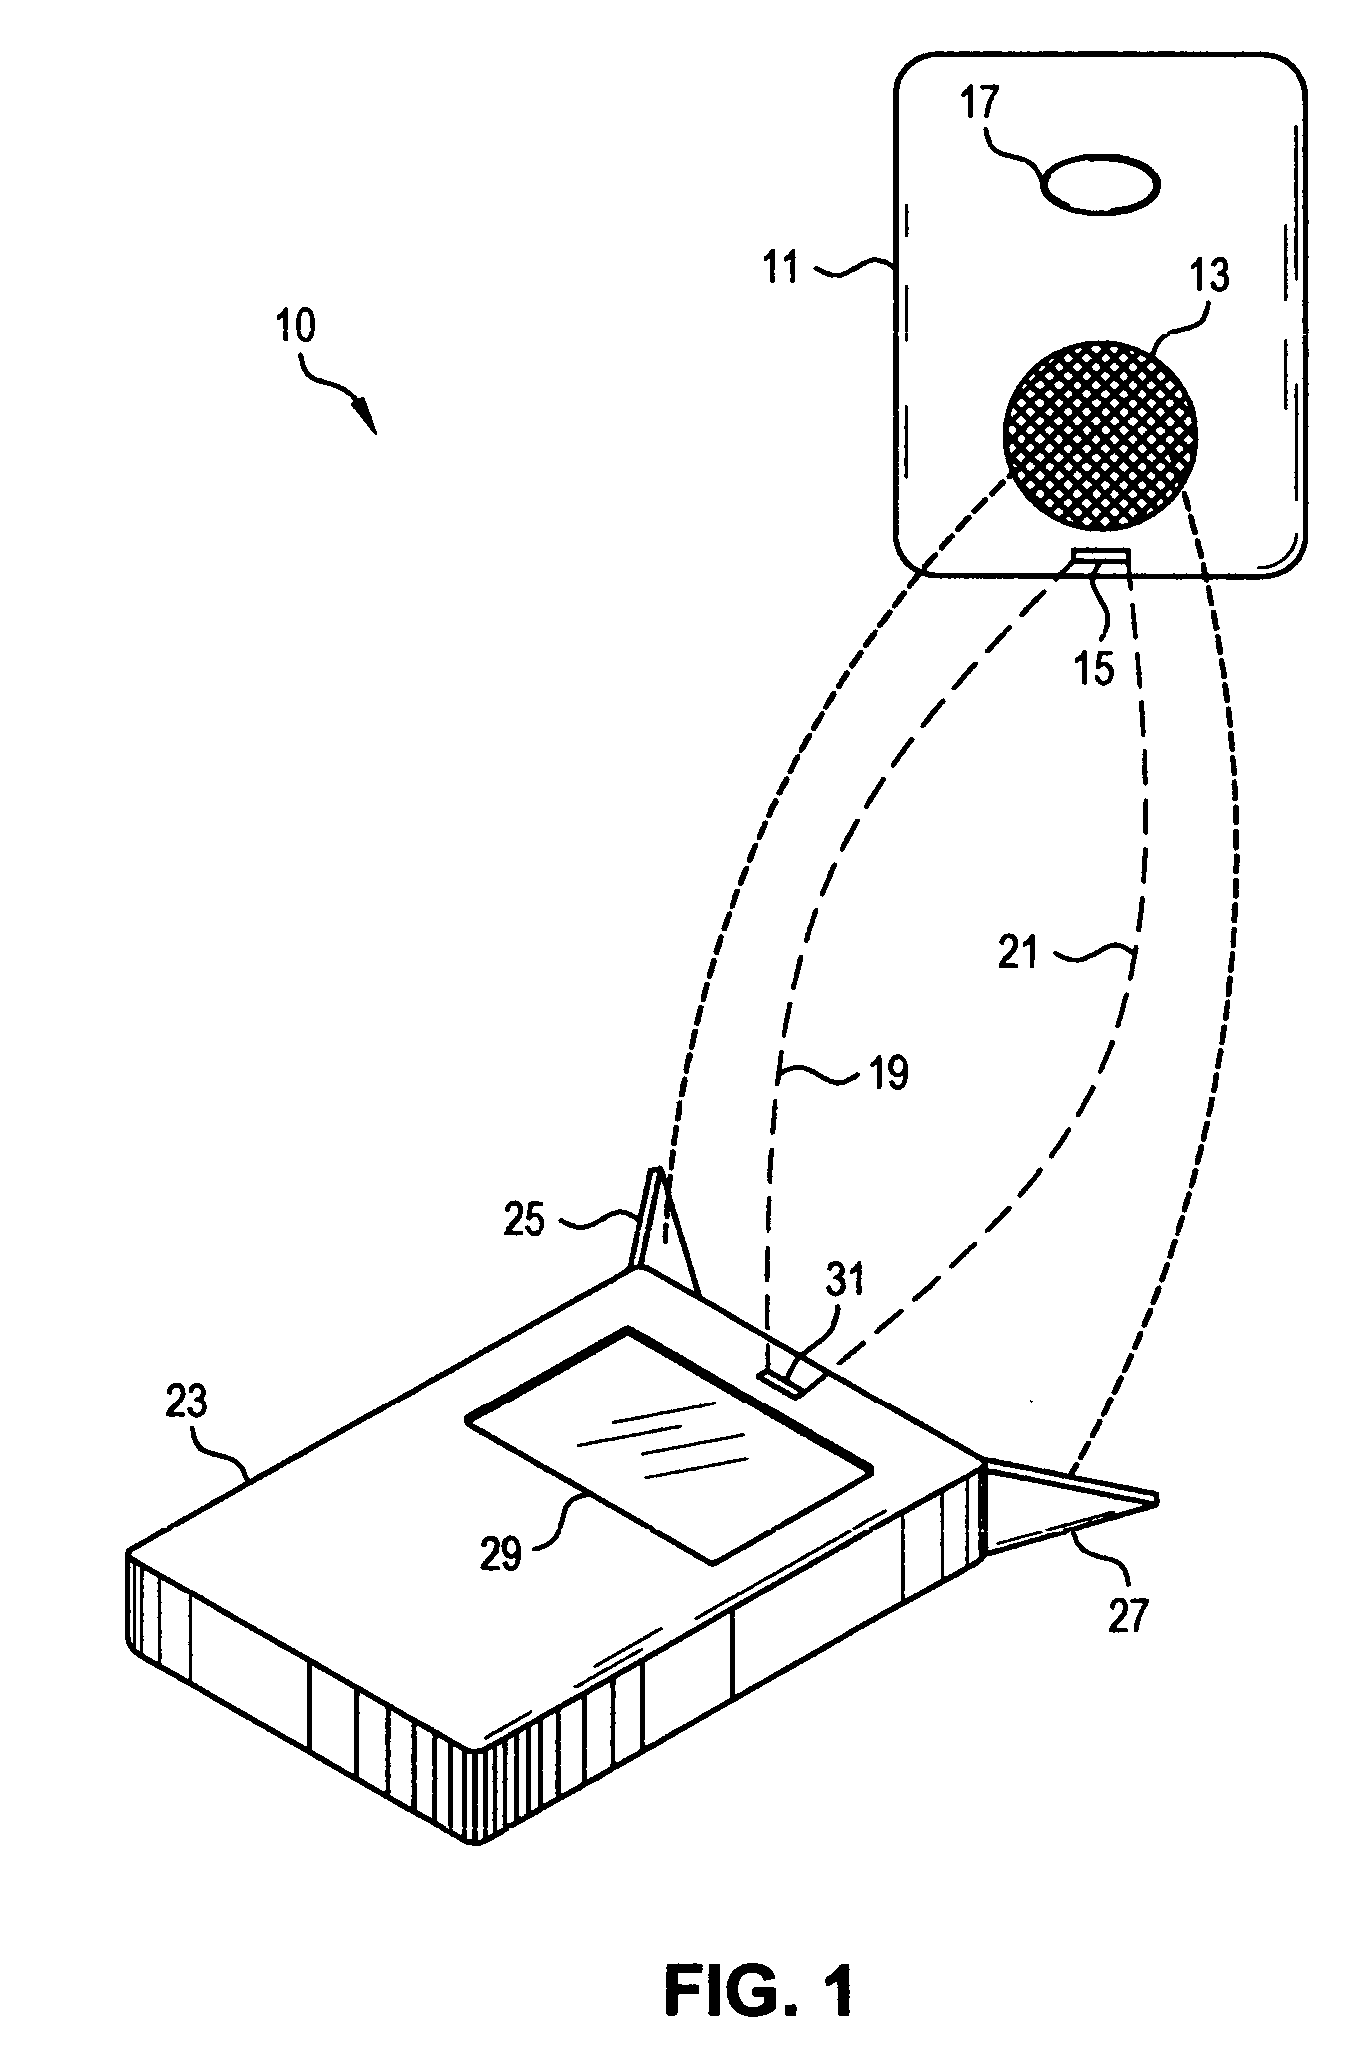 RF/acoustic person locator system